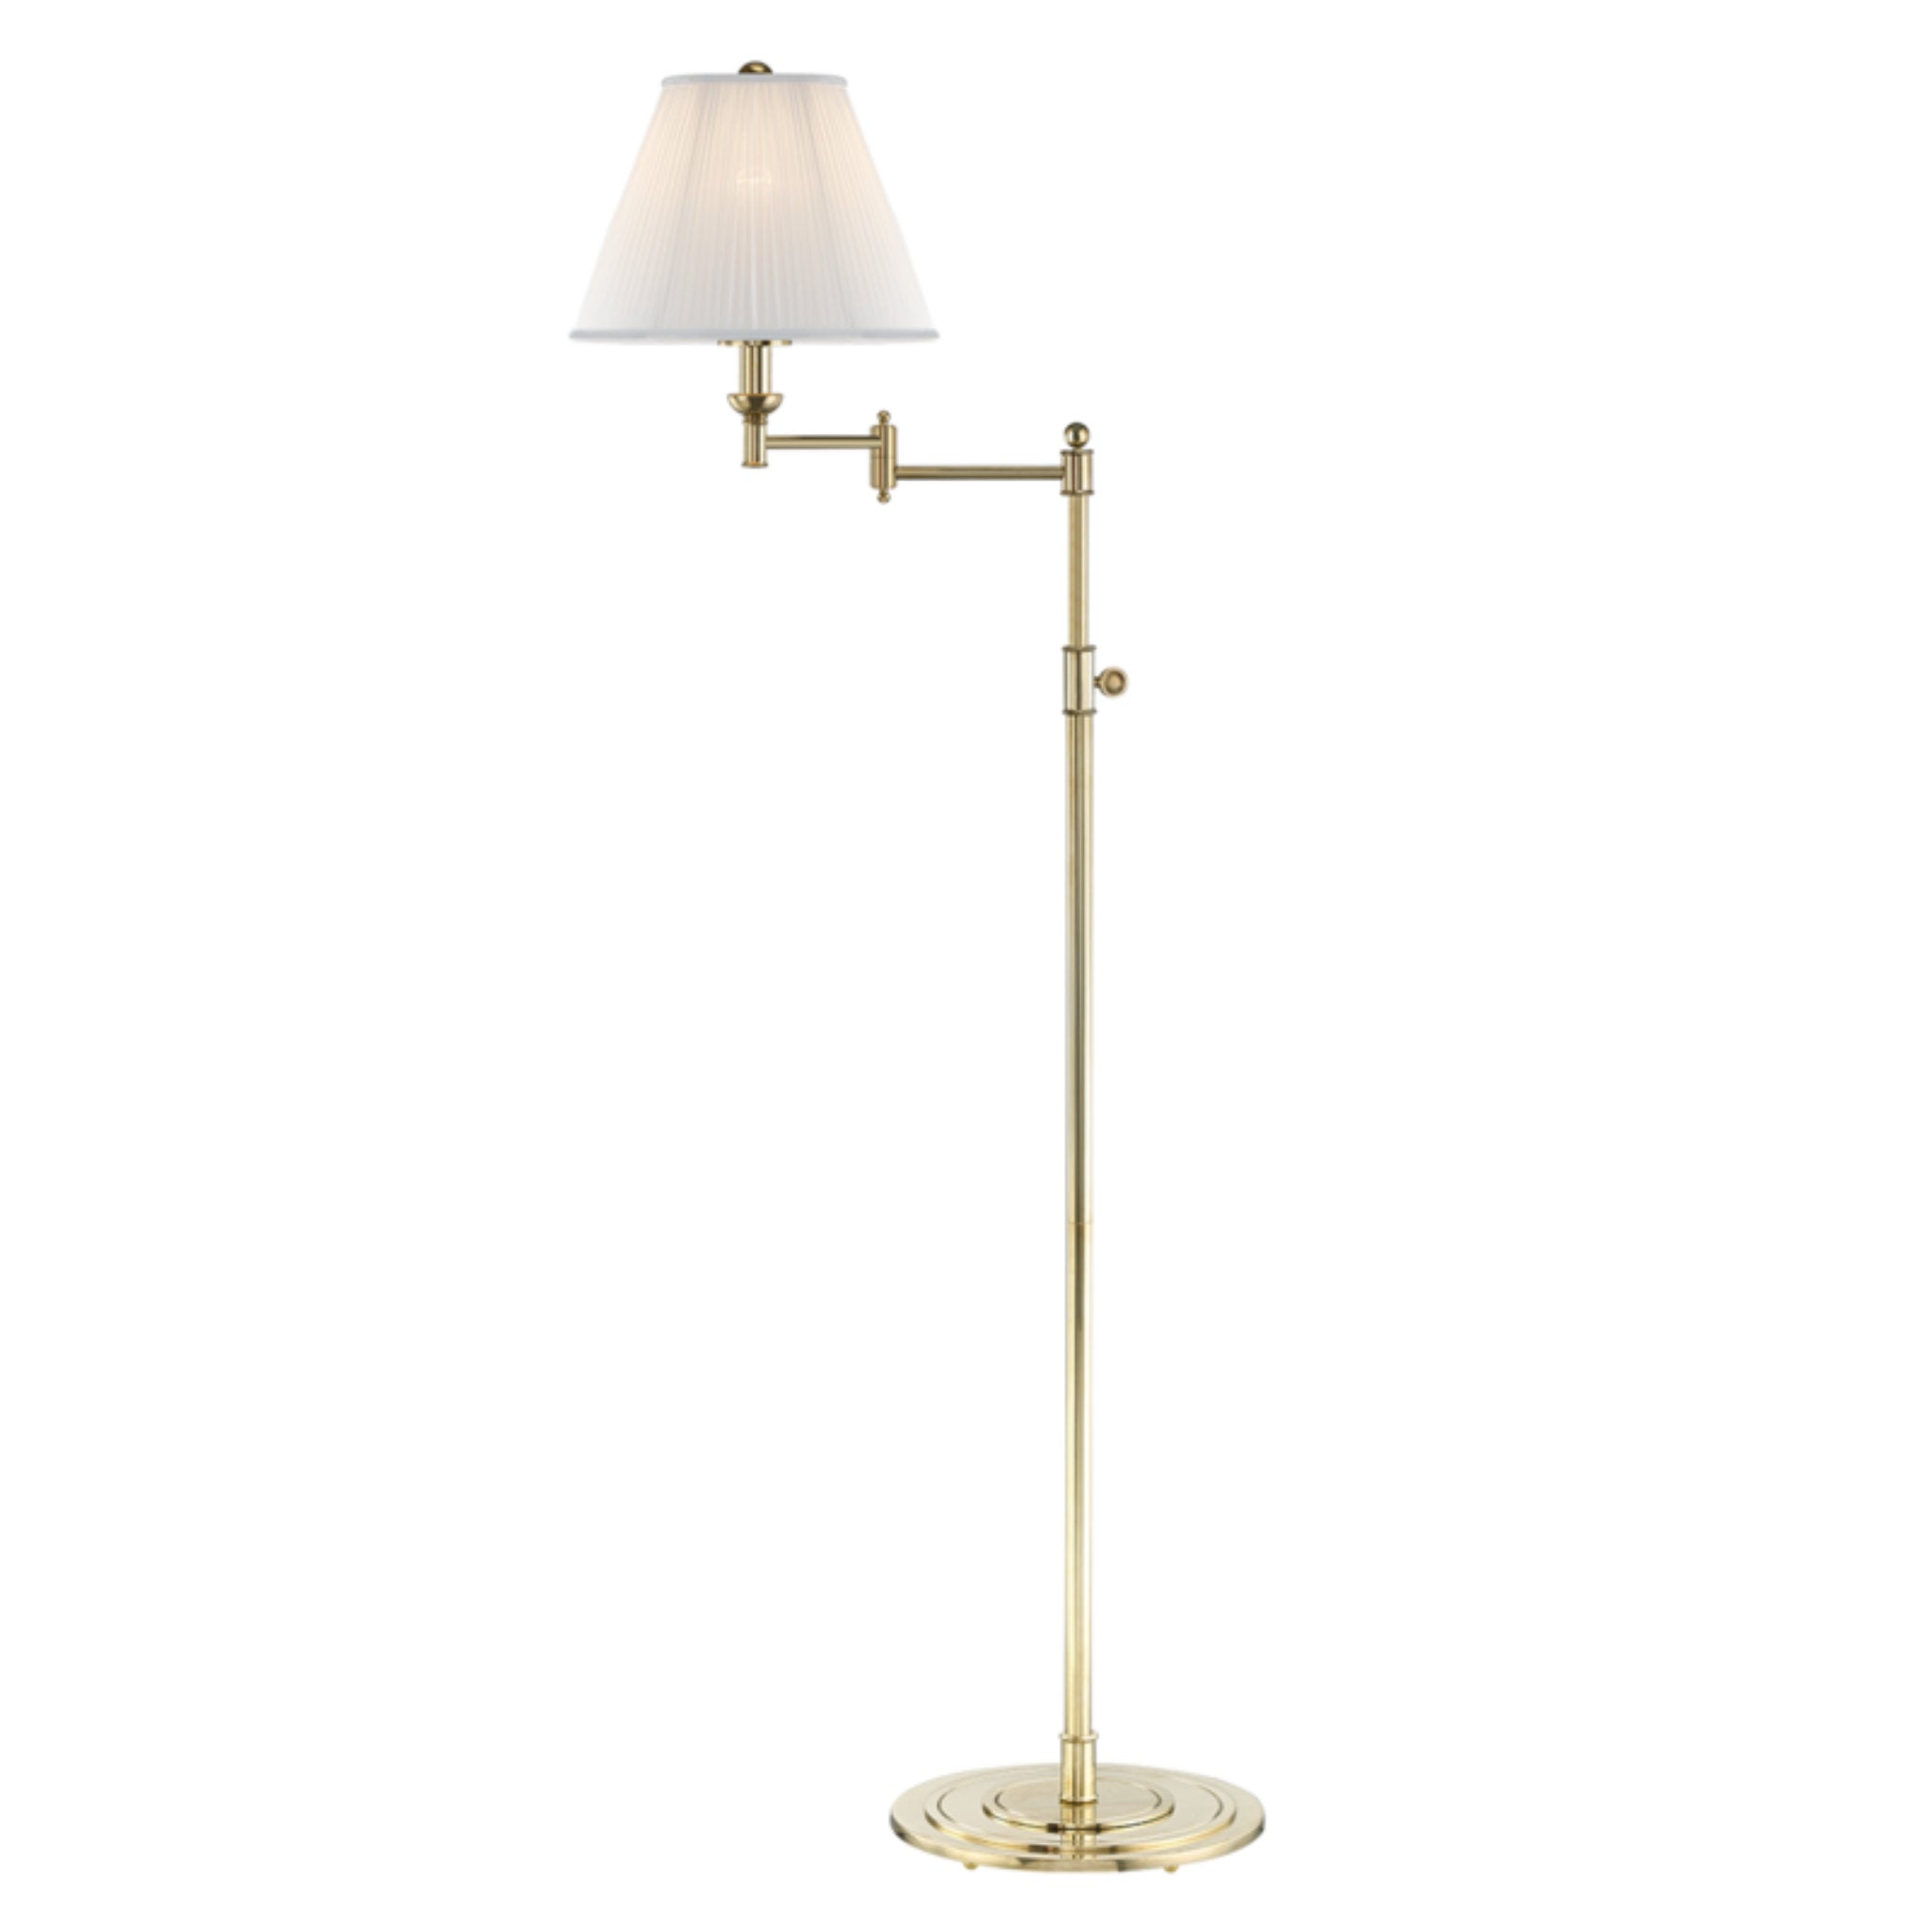 Signature No.1 1 Light Floor Lamp in Aged Brass by Mark D. Sikes